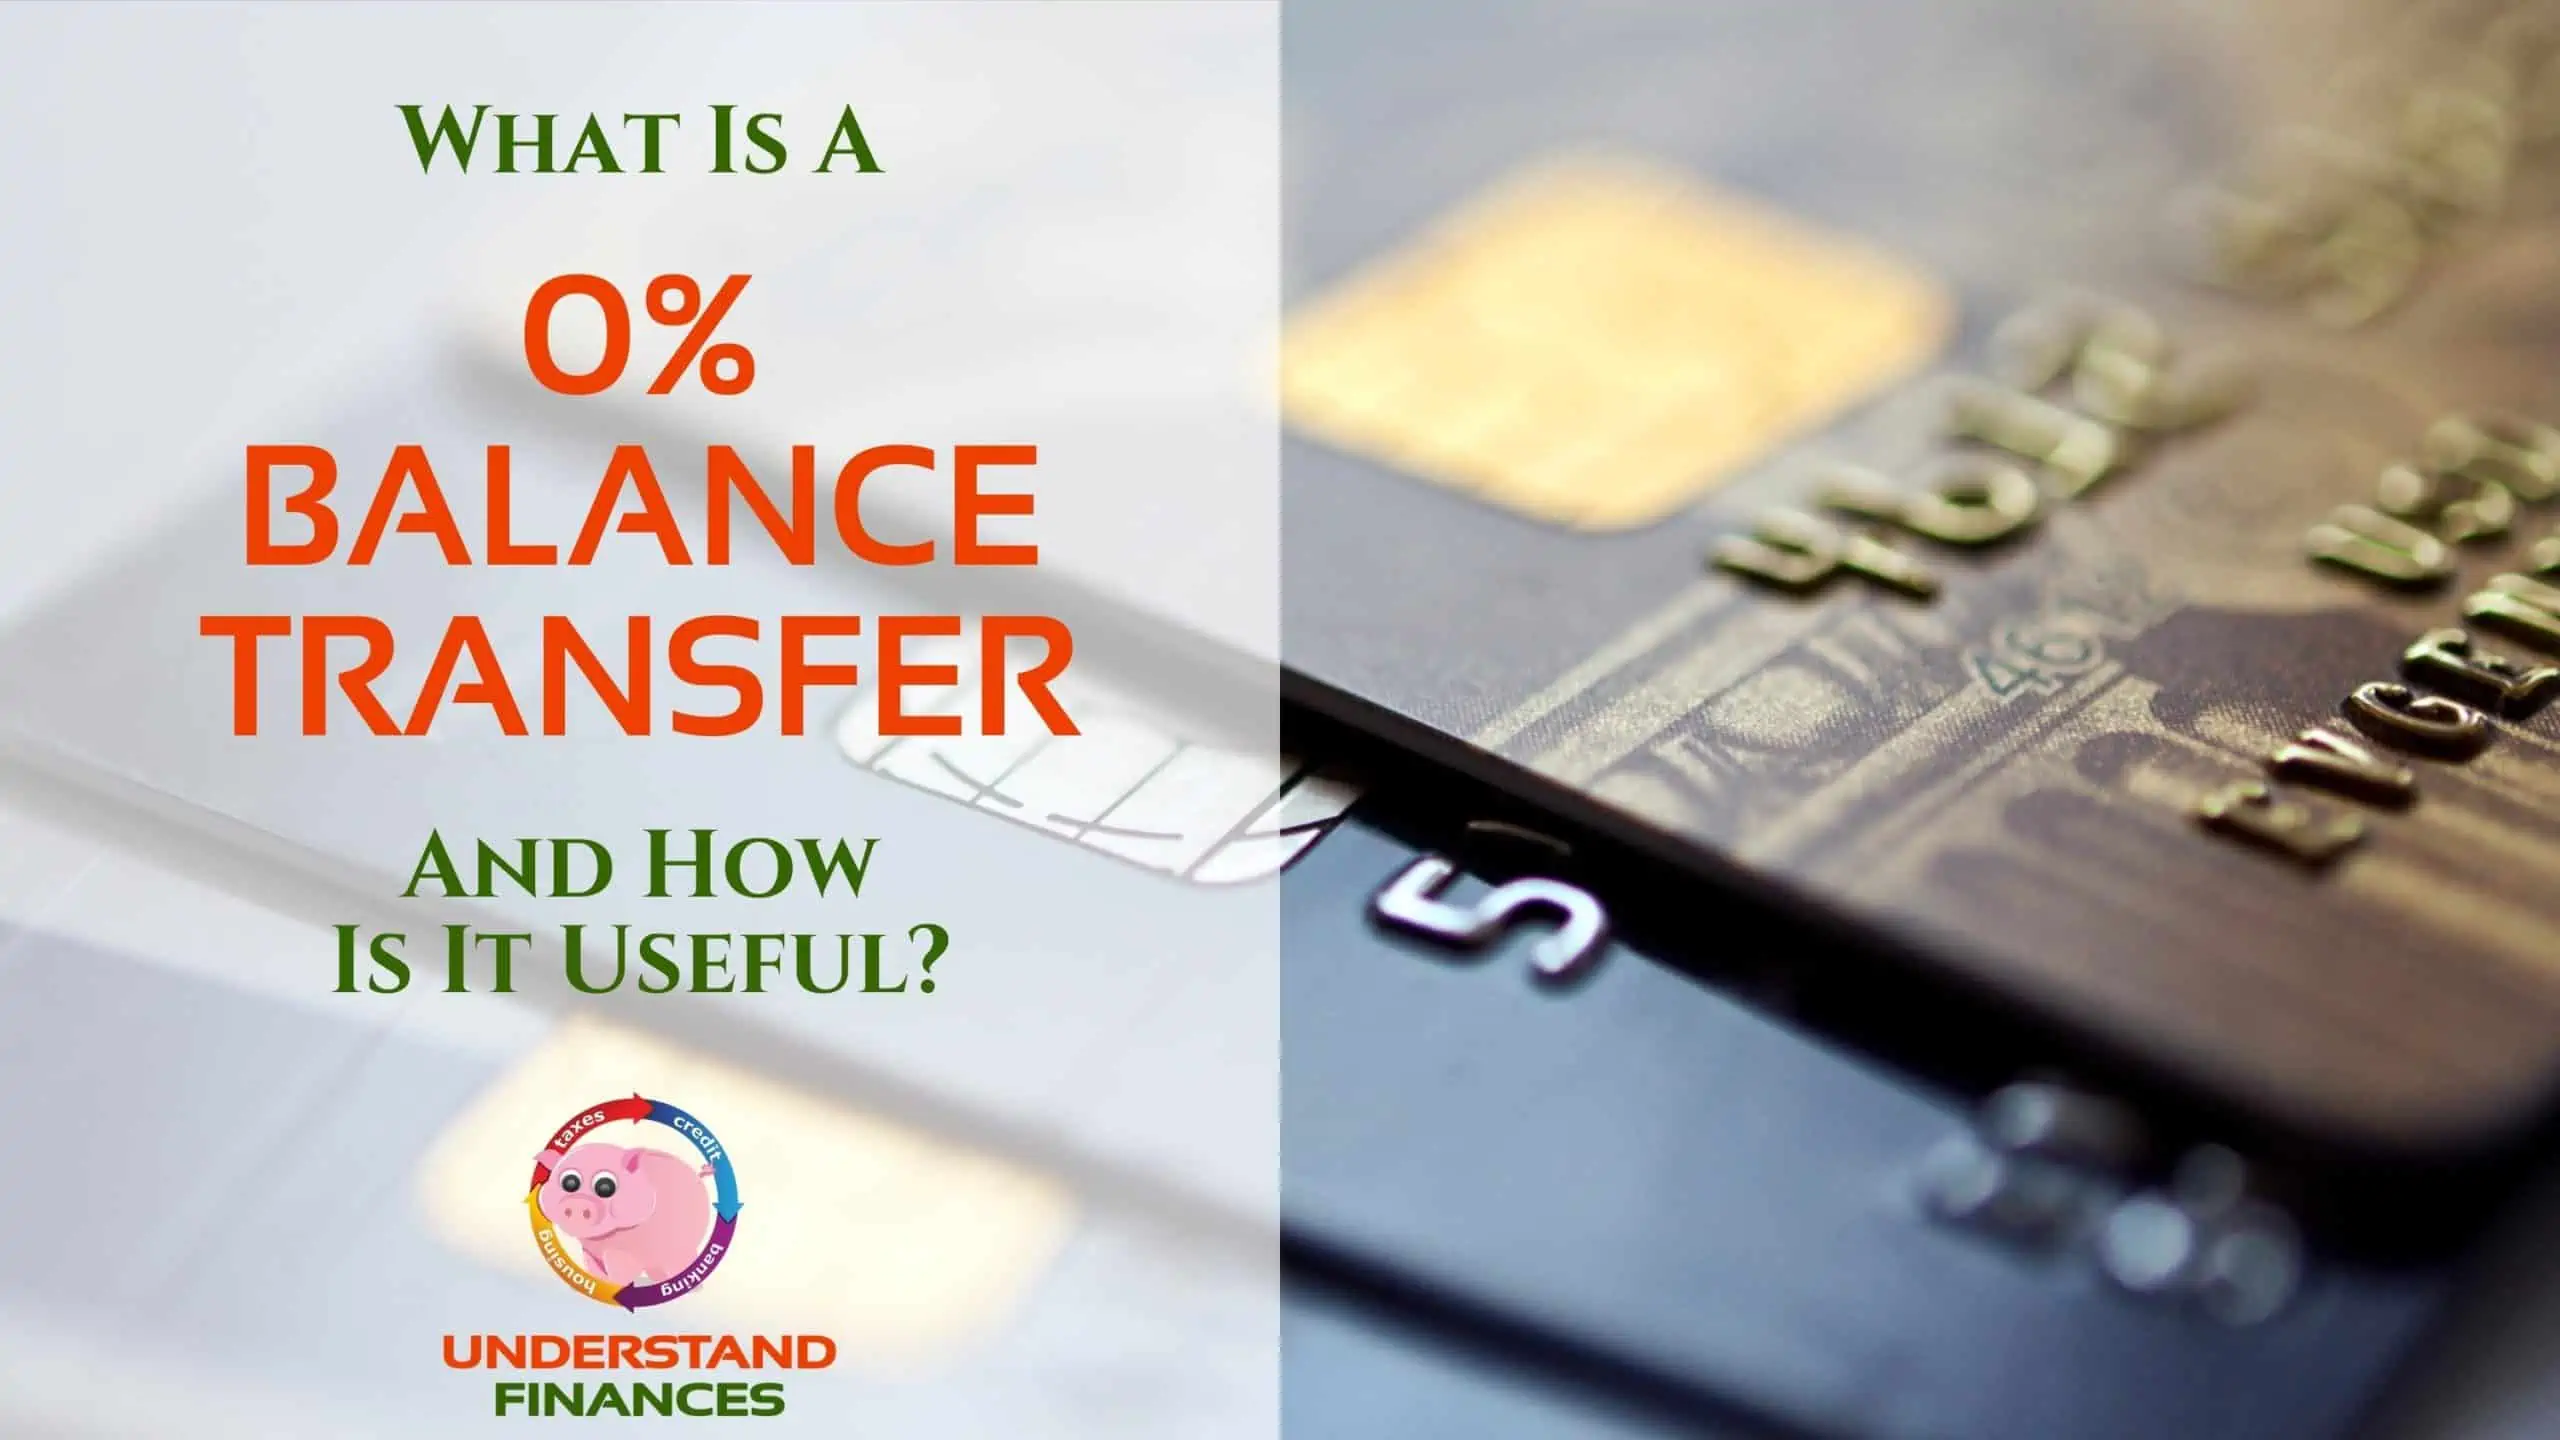 What Is A 0% Balance Transfer & How Can It Be Useful?